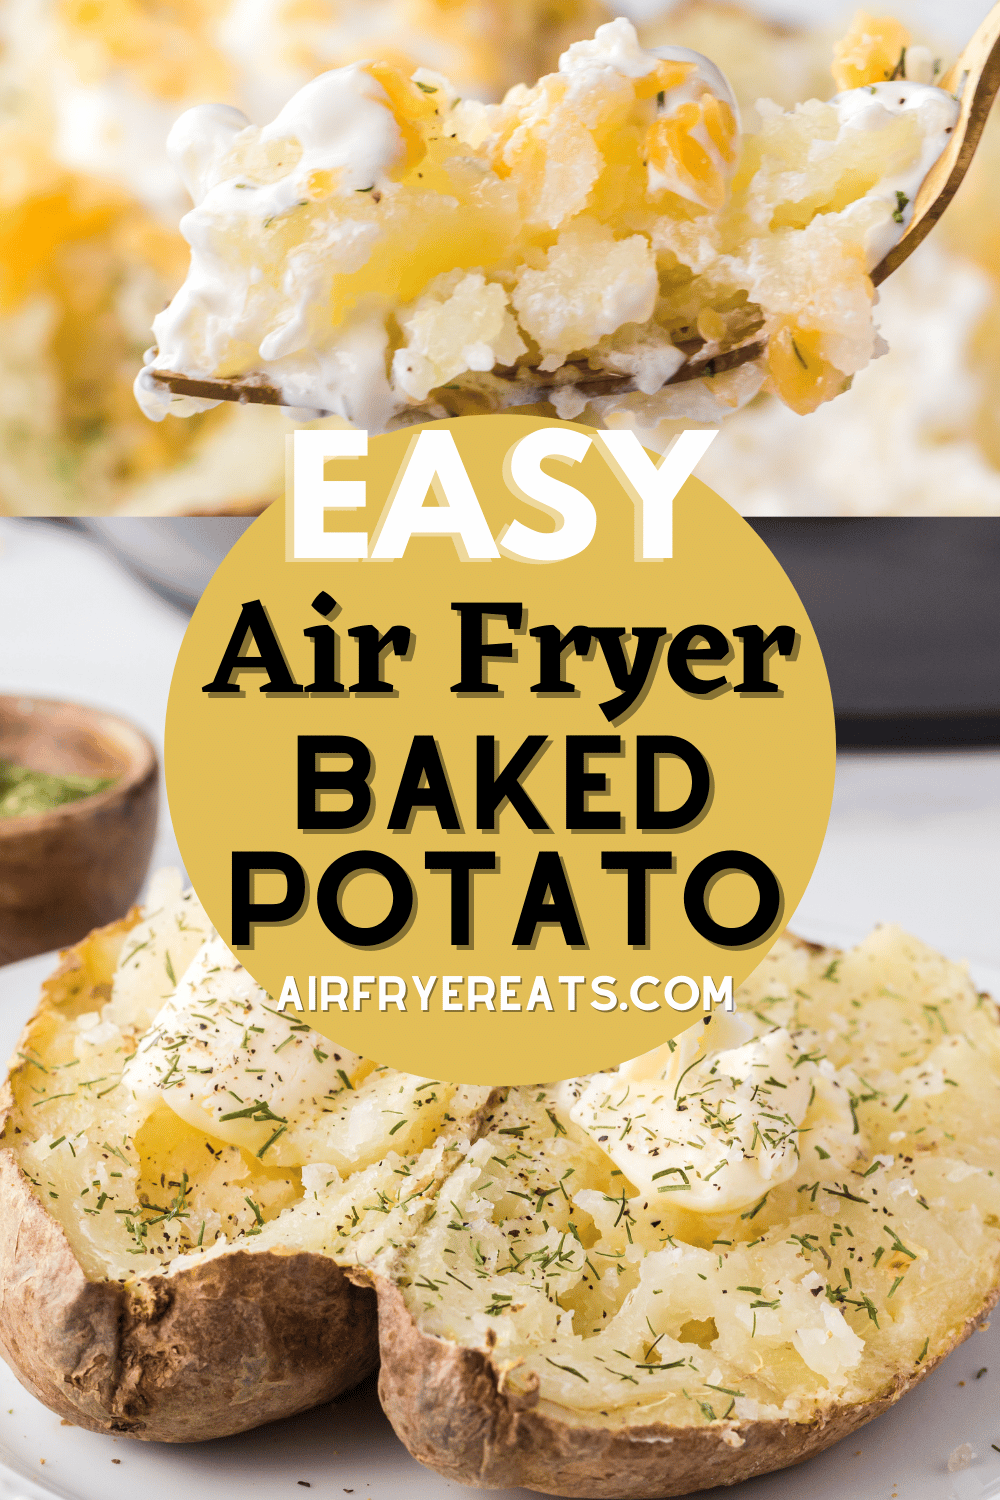 The perfect baked potato is a Ninja Foodi Baked Potato. In less time than it takes in an oven, the Ninja Foodi will air fry potatoes to tender, fluffy perfection. via @vegetarianmamma